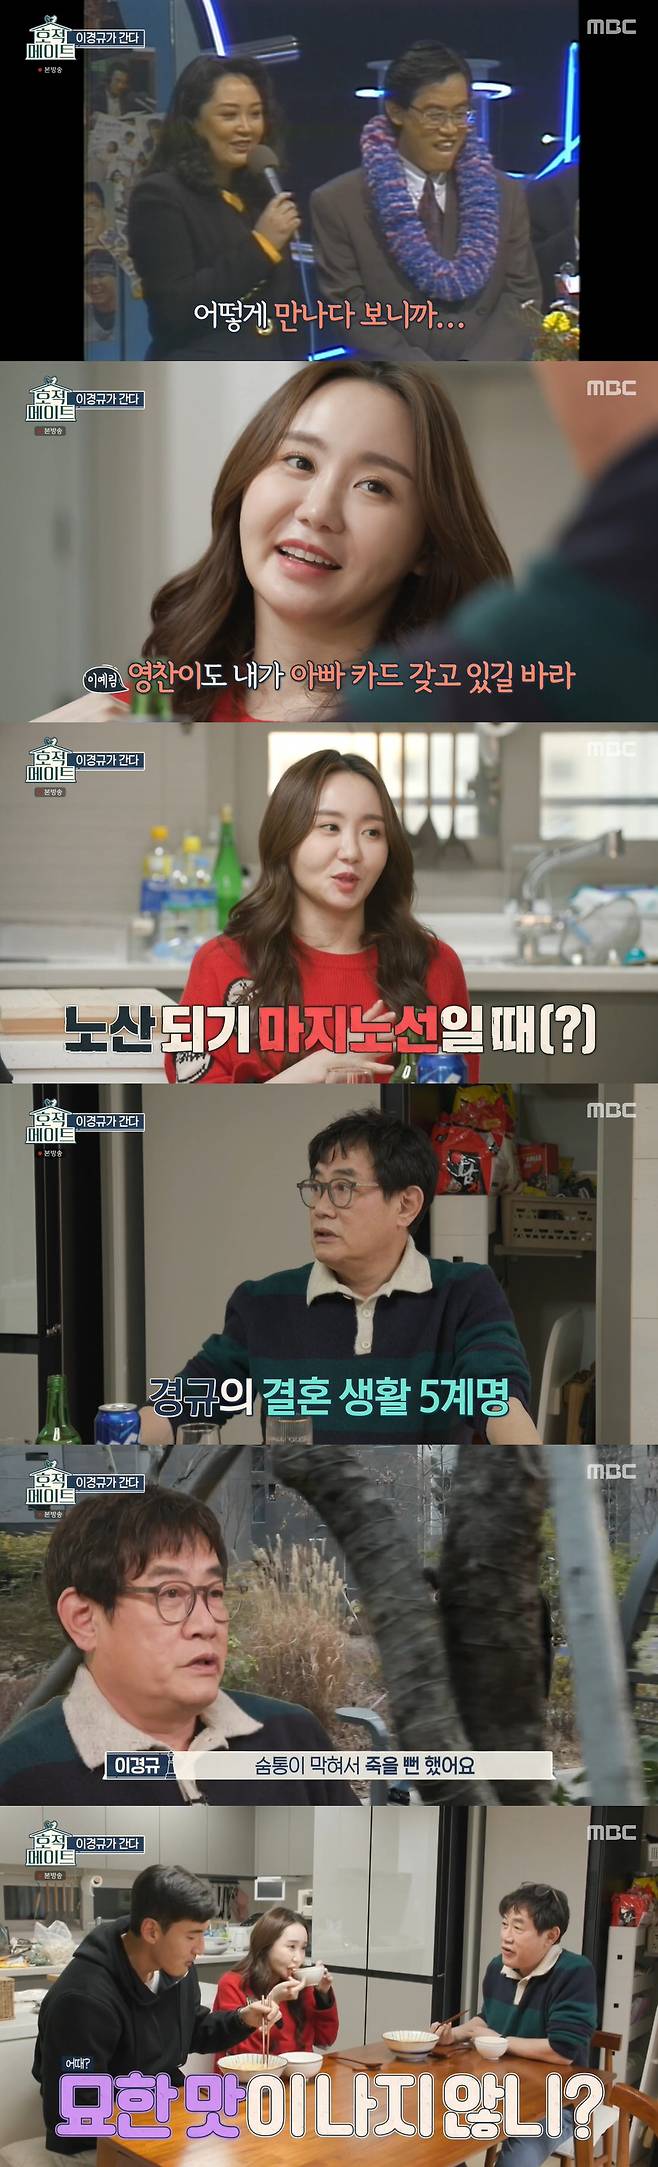 Lee Kyung-kyu and daughter Lee Ye Rim and son-in-law Kim Young-chan shared a genuine story.On MBC family mate broadcasted on the 15th, Lee Kyung-kyu, who visited his daughter Lee Ye Rims honeymoon house, was drawn.Lee Kyung-kyu praised her daughter Yerim for eating the seafood steamed rice prepared by her daughter, Yerim, saying, It is delicious. So, her son-in-law Kim Young-chan said, Yerim resembles her father and mothers cooking skills.Lee Kyung-kyu later said, Im telling you because Im married, and Yerim is lying all day long. I dont do laundry. I didnt do anything.This is the first time I have ever done it. Lee Ye Rim also admitted that he was not familiar with housework, saying, I came here for the first time.Lee Ye Rim, who is usually a lover, brought a drink and a glass of wheat during a story with Father.Lee Kyung-kyu, who saw this, said, I am sorry for Young Chan, he said, I am a craftsman, but can I come and drink?I do not talk much with Yerim and me, but I drank alcohol. I can not drink if I do not talk, but it is strange.Asked by Kim Young-chan if he was curious about his honeymoon home, Lee Kyung-kyu said, I thought it was strange to live with him rather than that, because he looks young.I saw it from the moment of the birth of Yerim, and I still remember what I saw at that time. But soon, I think my face changed a lot when I was born when I was a child.I thought it was over when I was a child. I thought it was the best, but I wanted to have something in the growth process. Lee Kyung-kyu then asked Kim Young-chan about what is good about Yerim.Kim Young-chan expressed his affection, saying, I do not think if I am comfortable with the stress I receive when I play soccer.Lee Kyung-kyu said, Yerim does not think about the future. Lee Ye Rim said, I am a person who thinks about the future.Im lying down and thinking about the future, he said.However, Lee Kyung-kyu continued, Does Yerim not even talk about soccer?It is cool if you talk good, and if you talk bad, you are not interested. I am grateful that Young Chan took Yerim.People say, Youre married, so youre feeling good. I like it. Im so excited to think youre still at home.Meanwhile, Lee Kyung-kyu was embarrassed to say, I met with my mother-in-law as a junior in school when asked about his son-in-laws surprise question, How did you meet with your mother-in-law?It was a wrong decision, he said, sighing and sighing about the reason for his decision to marry.Lee Ye Rim said, Kim Young-chan has the economic right, and Kim Young-chan explained, If Yelim wants it, he can give it. He asked me for living expenses.Lee Ye Rim acknowledged, I do not know what to do with money, Lee Kyung-kyu said.Its better to give me a living fee even if I think about it, he said.Other cast members who saw this asked Lee Kyung-kyu who had the economic rights, and Lee Kyung-kyu said, I have it, we dont do investments, we invest in me.Im going to do a movie, he said with a embarrassed laugh.Lee Ye Rim said, I still have Fathers credit card before marriage. It is a little ambiguous to use my husbands card when I am in Seoul.It is still easy to use a Father card, and my husband wants me to have a Father card. Kim Young-chan was embarrassed, saying, I told you to keep it in case you do not know. Lee Ye Rim laughed, saying, I will give it after the card expires. It is 2026.Lee Ye Rim said on the day, I will have it when I am a non-major line.Lee Kyung-kyu, who heard her daughters new concept of the second generation, said, Ive never heard of such a story.Lee Ye Rim said he would give birth to only one or two children. Father does not know, but when my mother gets me, she says, I bring my brother when I do this. I wanted to love alone. I liked it alone. I felt lonely because I had dogs. Lee Kyung-kyu told her son-in-laws advice on marriage, and gave her five commandments for her own marriage.Lee Kyung-kyu, who continued his admiration, such as Do not shout except when you are burning and Do not swear to your other family, was surprised to say, You can lie.If you do it, you have to lie perfectly; if you lie like a sand cover, you will break the trust between the couple, he advised.Lee Ye Rim asked, Do you have a lie to take Father to the grave? Lee Kyung-kyu quipped, There are about 10 tombs.Lee Ye Rim took a dog walk alone to get close between an awkward craftsman and his son-in-law.Lee Kyung-kyu and Kim Young-chan, to hide the awkwardness, only the name of the dog was called out and laughed. Lee Kyung-kyu said, I almost died because my breath was blocked.I told him about the runge because I had runge in the middle. Kim Young-chan said, I have a wish.I always praised the ramen that Father boils, but I want to try it. Lee Kyung-kyu showed his own special ramen recipe for athletes son-in-law using host herbs and chicken breasts in Lee Ye Rims newlywed house.Kim Young-chan, who tasted Lee Kyung-kyus ramen noodles, said, It is an unfamiliar combination that I could not think of at all. He said, It is really delicious.